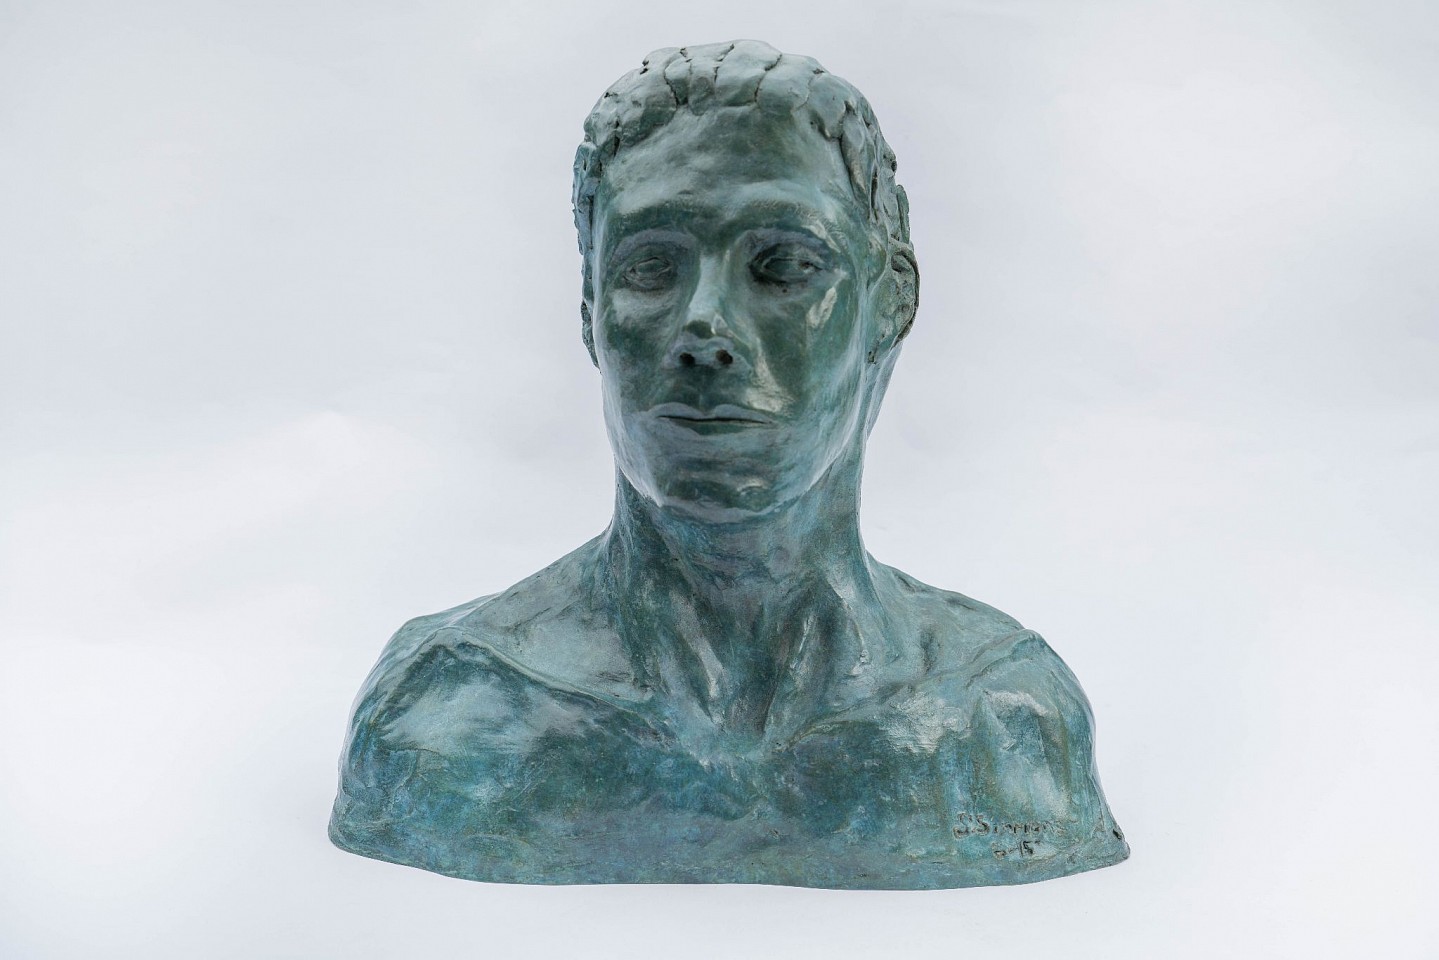 Steven Simmons, Lost in Thought
bronze, 12 1/2 x 13 1/2 x 8 in. (31.8 x 34.3 x 20.3 cm)
SS200217